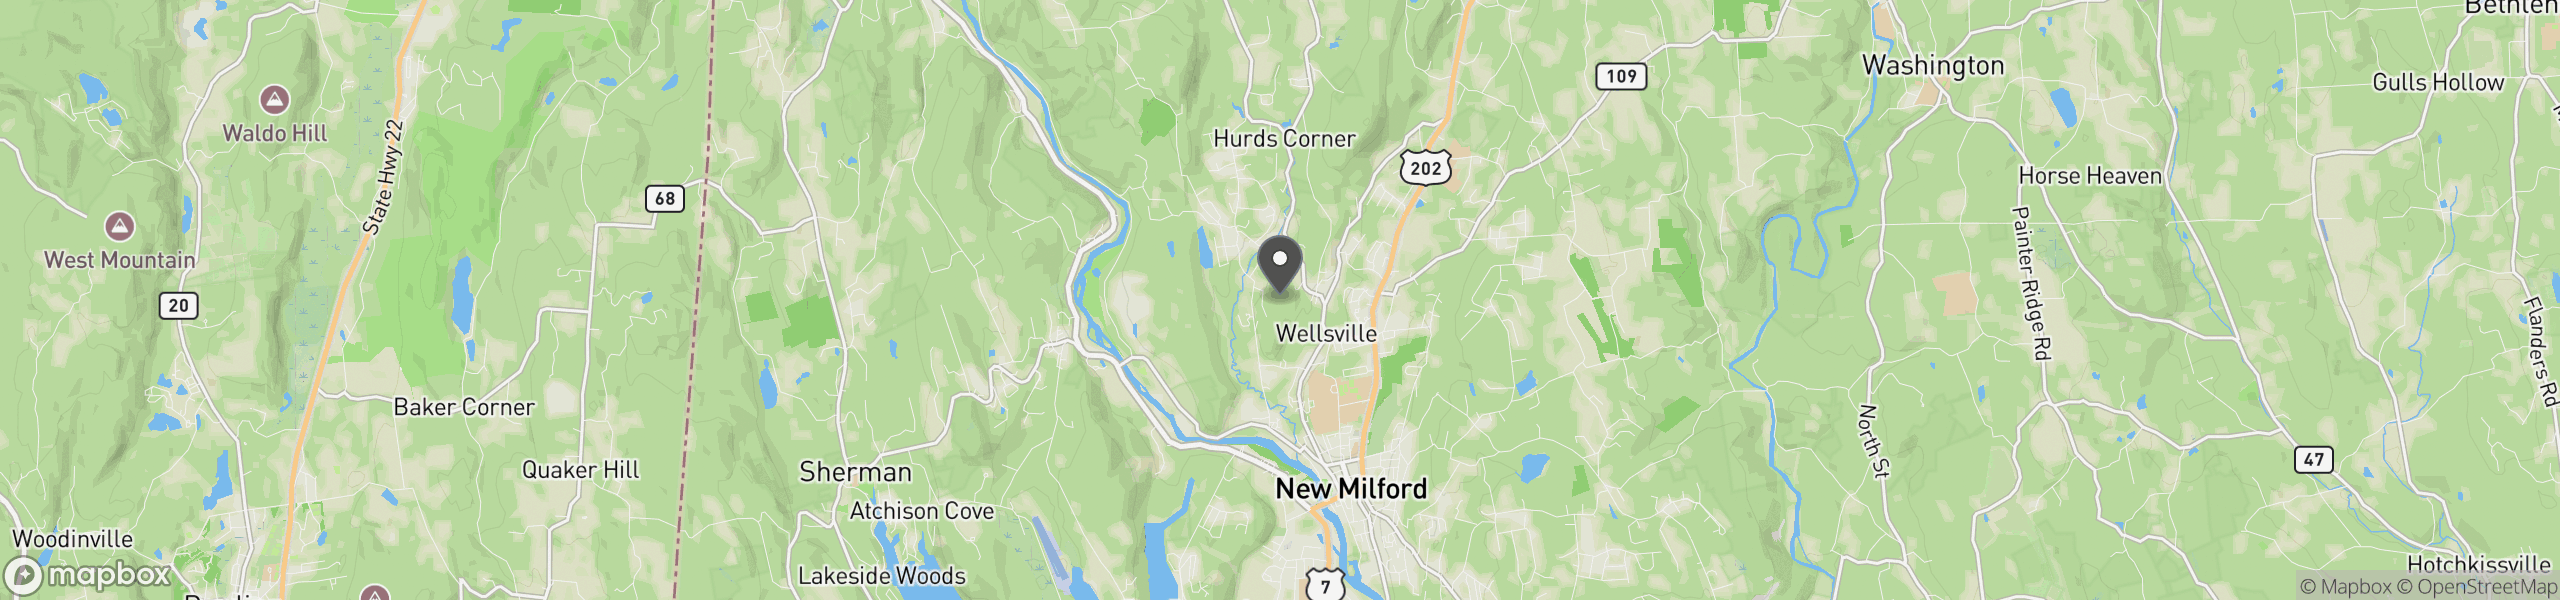 New Milford, CT